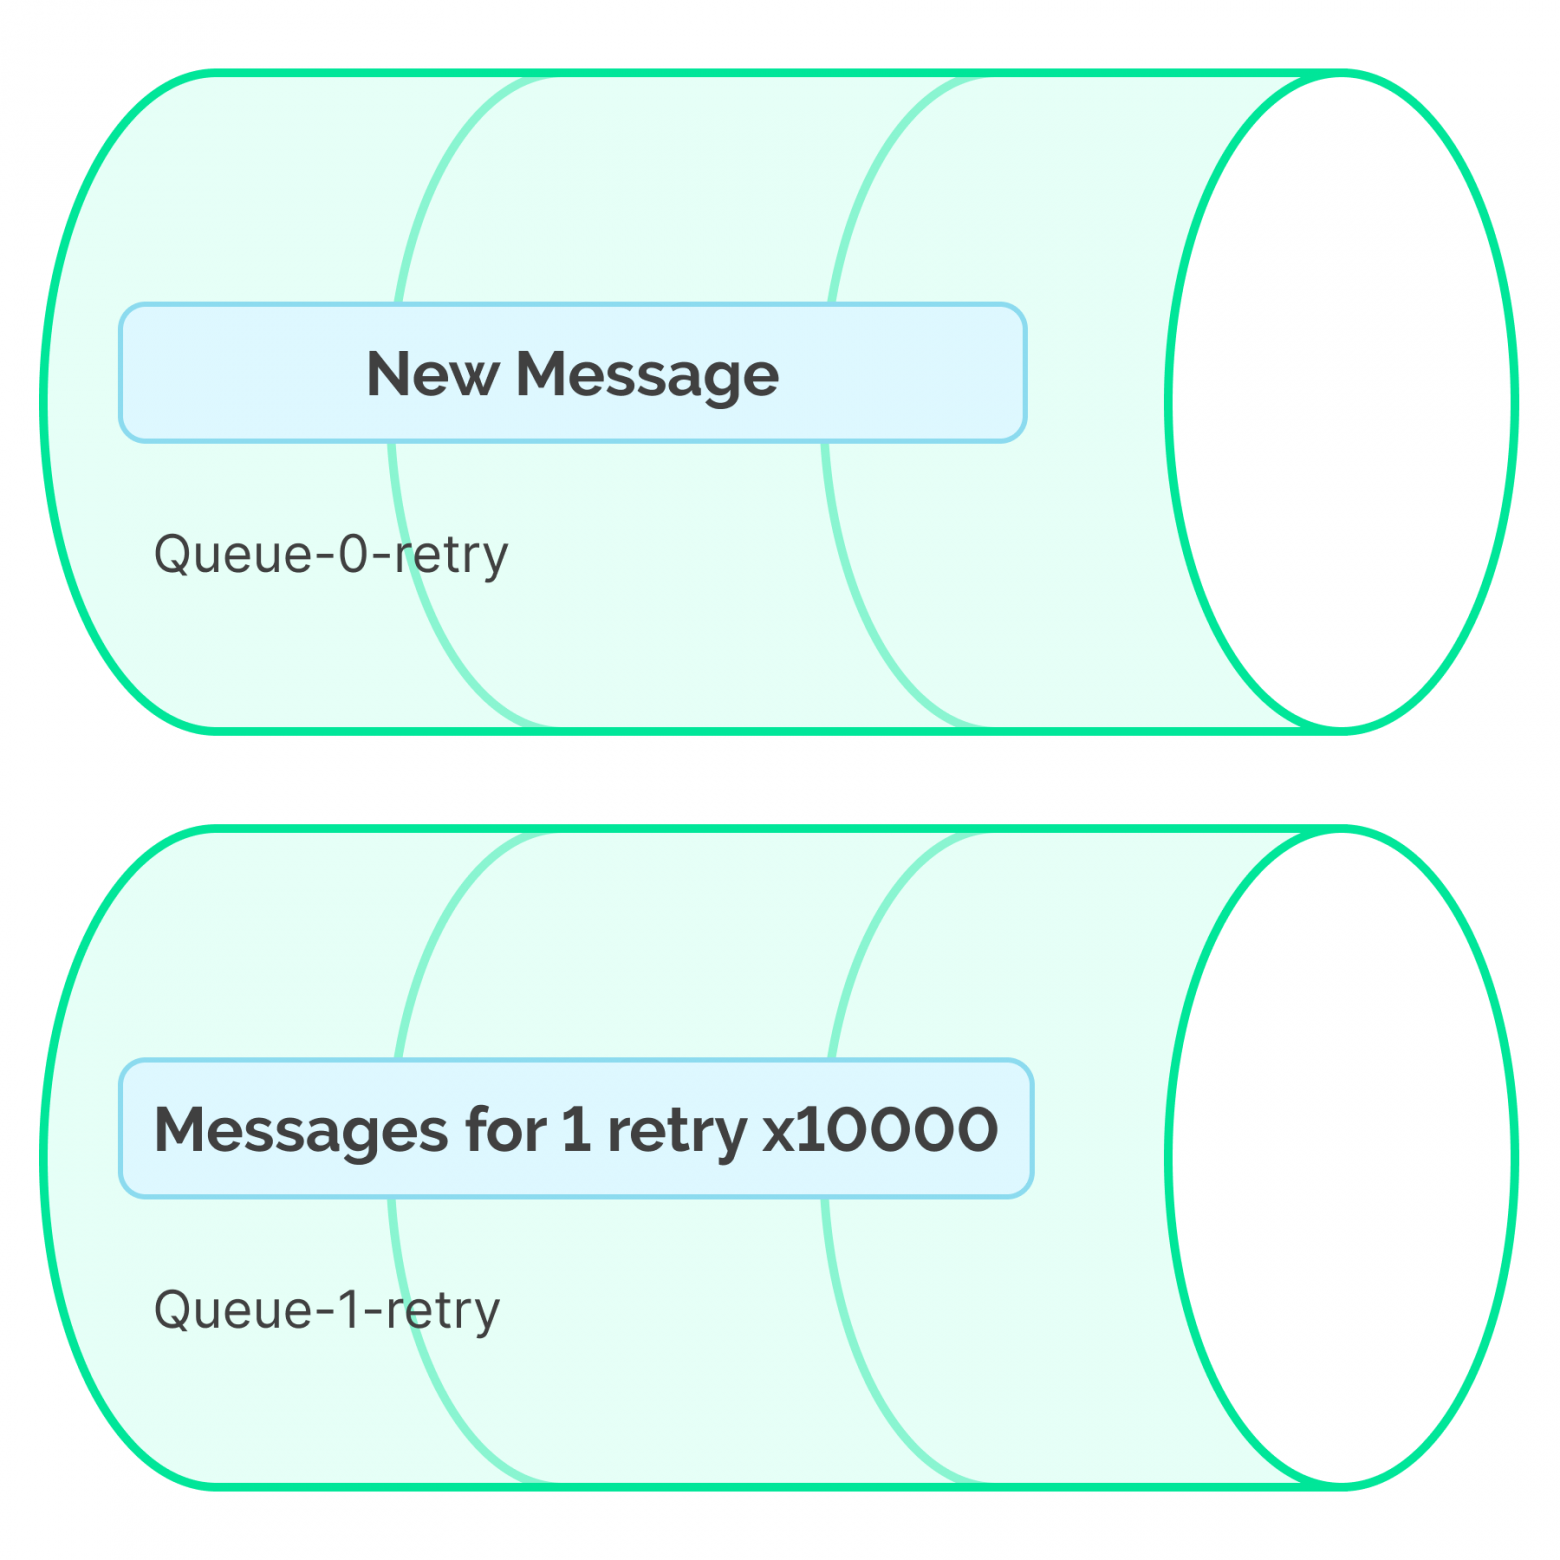 Example of using a priority message queue